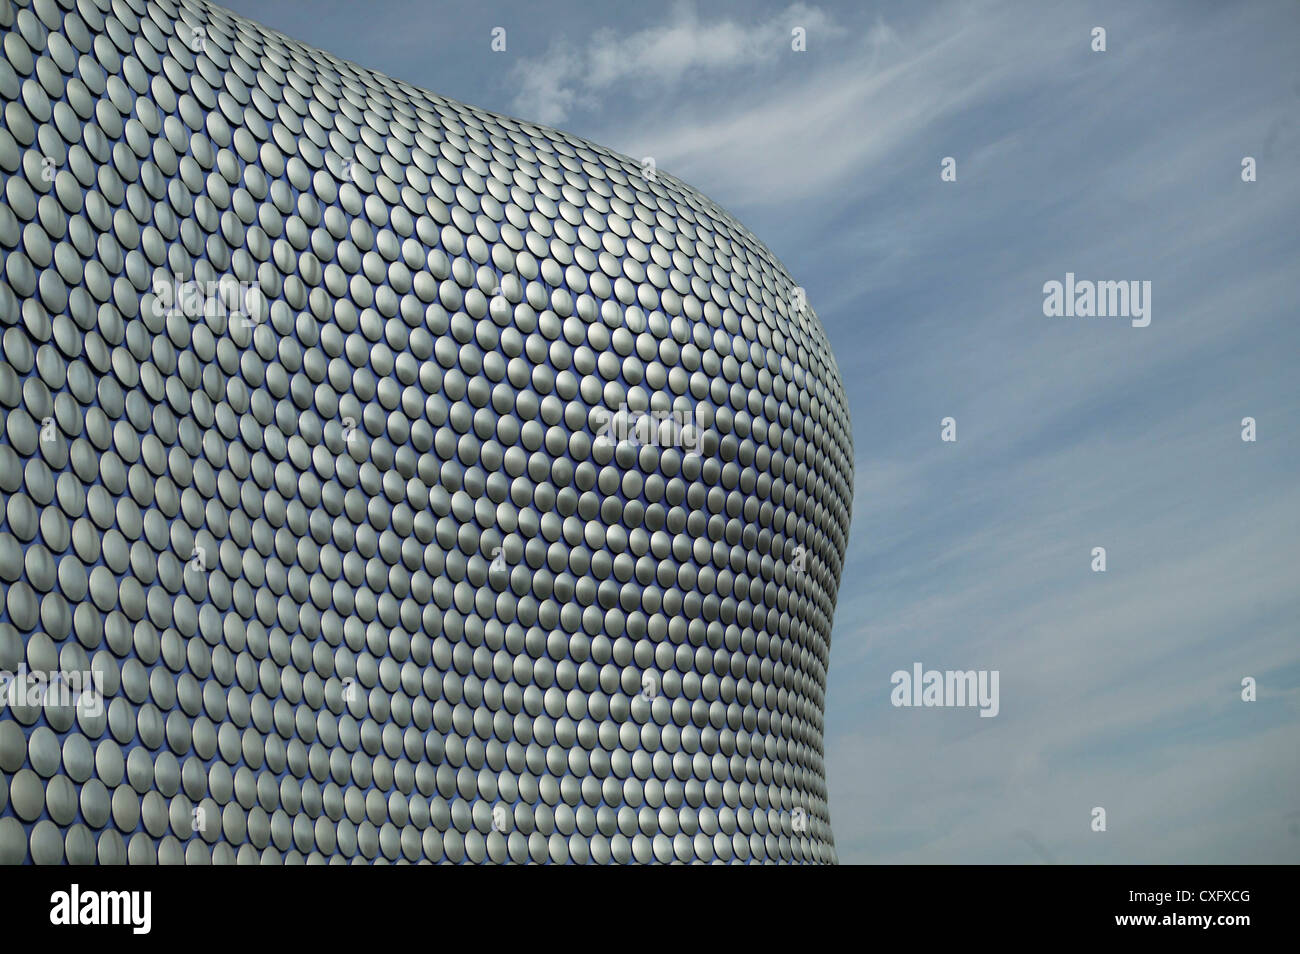 The Selfridges Building is a landmark building in Birmingham, England. The building is part of the Bullring Shopping Centre and Stock Photo